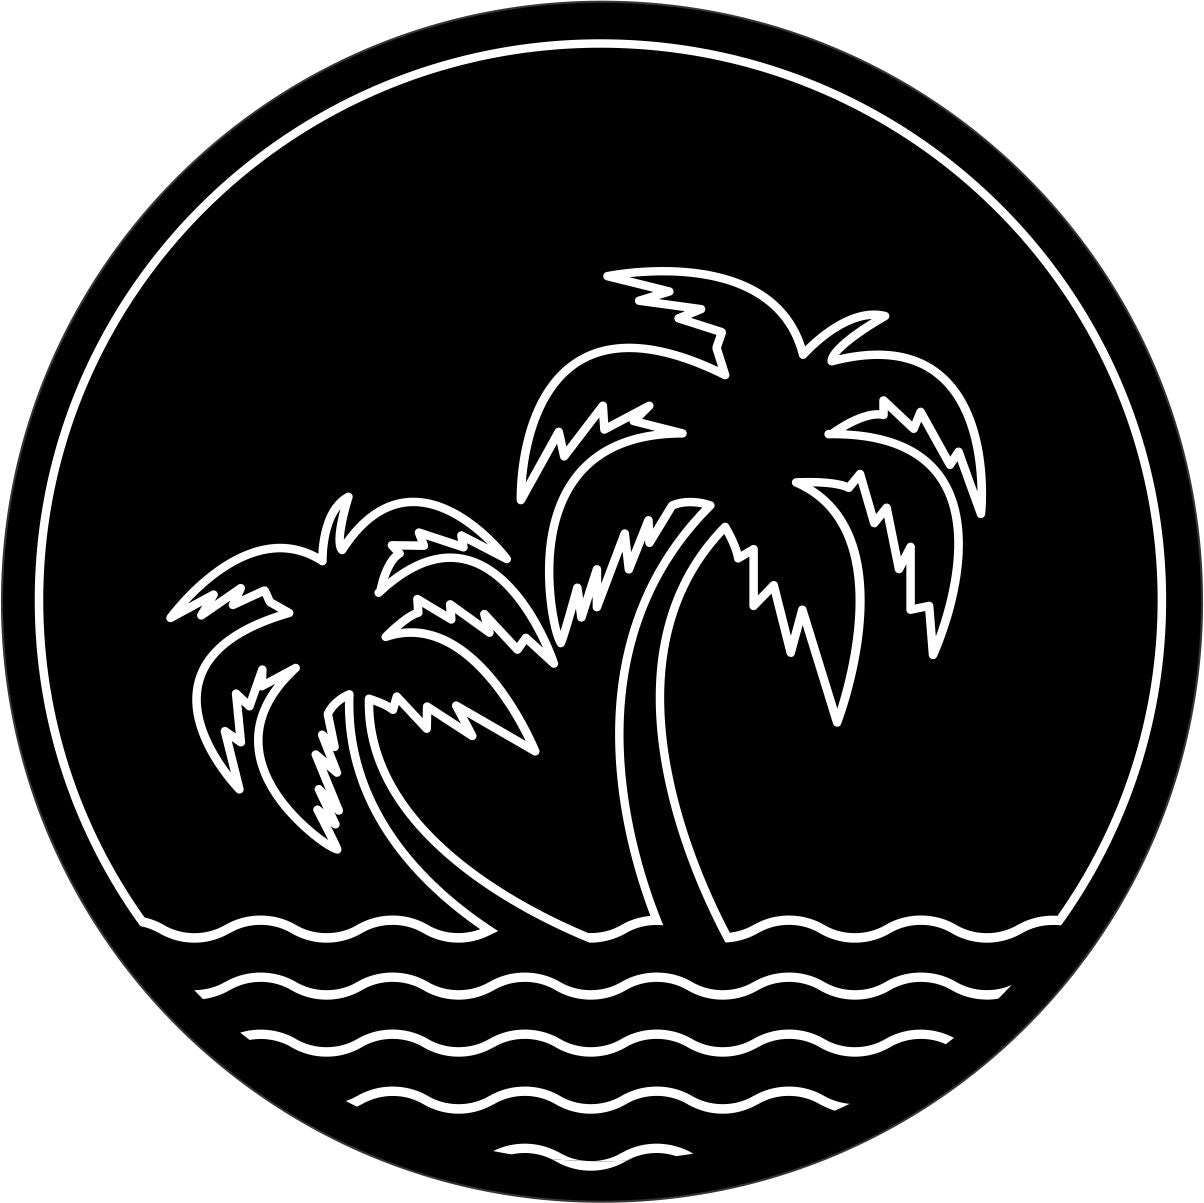 Simple line art palm trees on the water spare tire cover design on black vinyl for Jeeps, Broncos, RV, campers, vans, and any other vehicle with an exterior spare tire. 